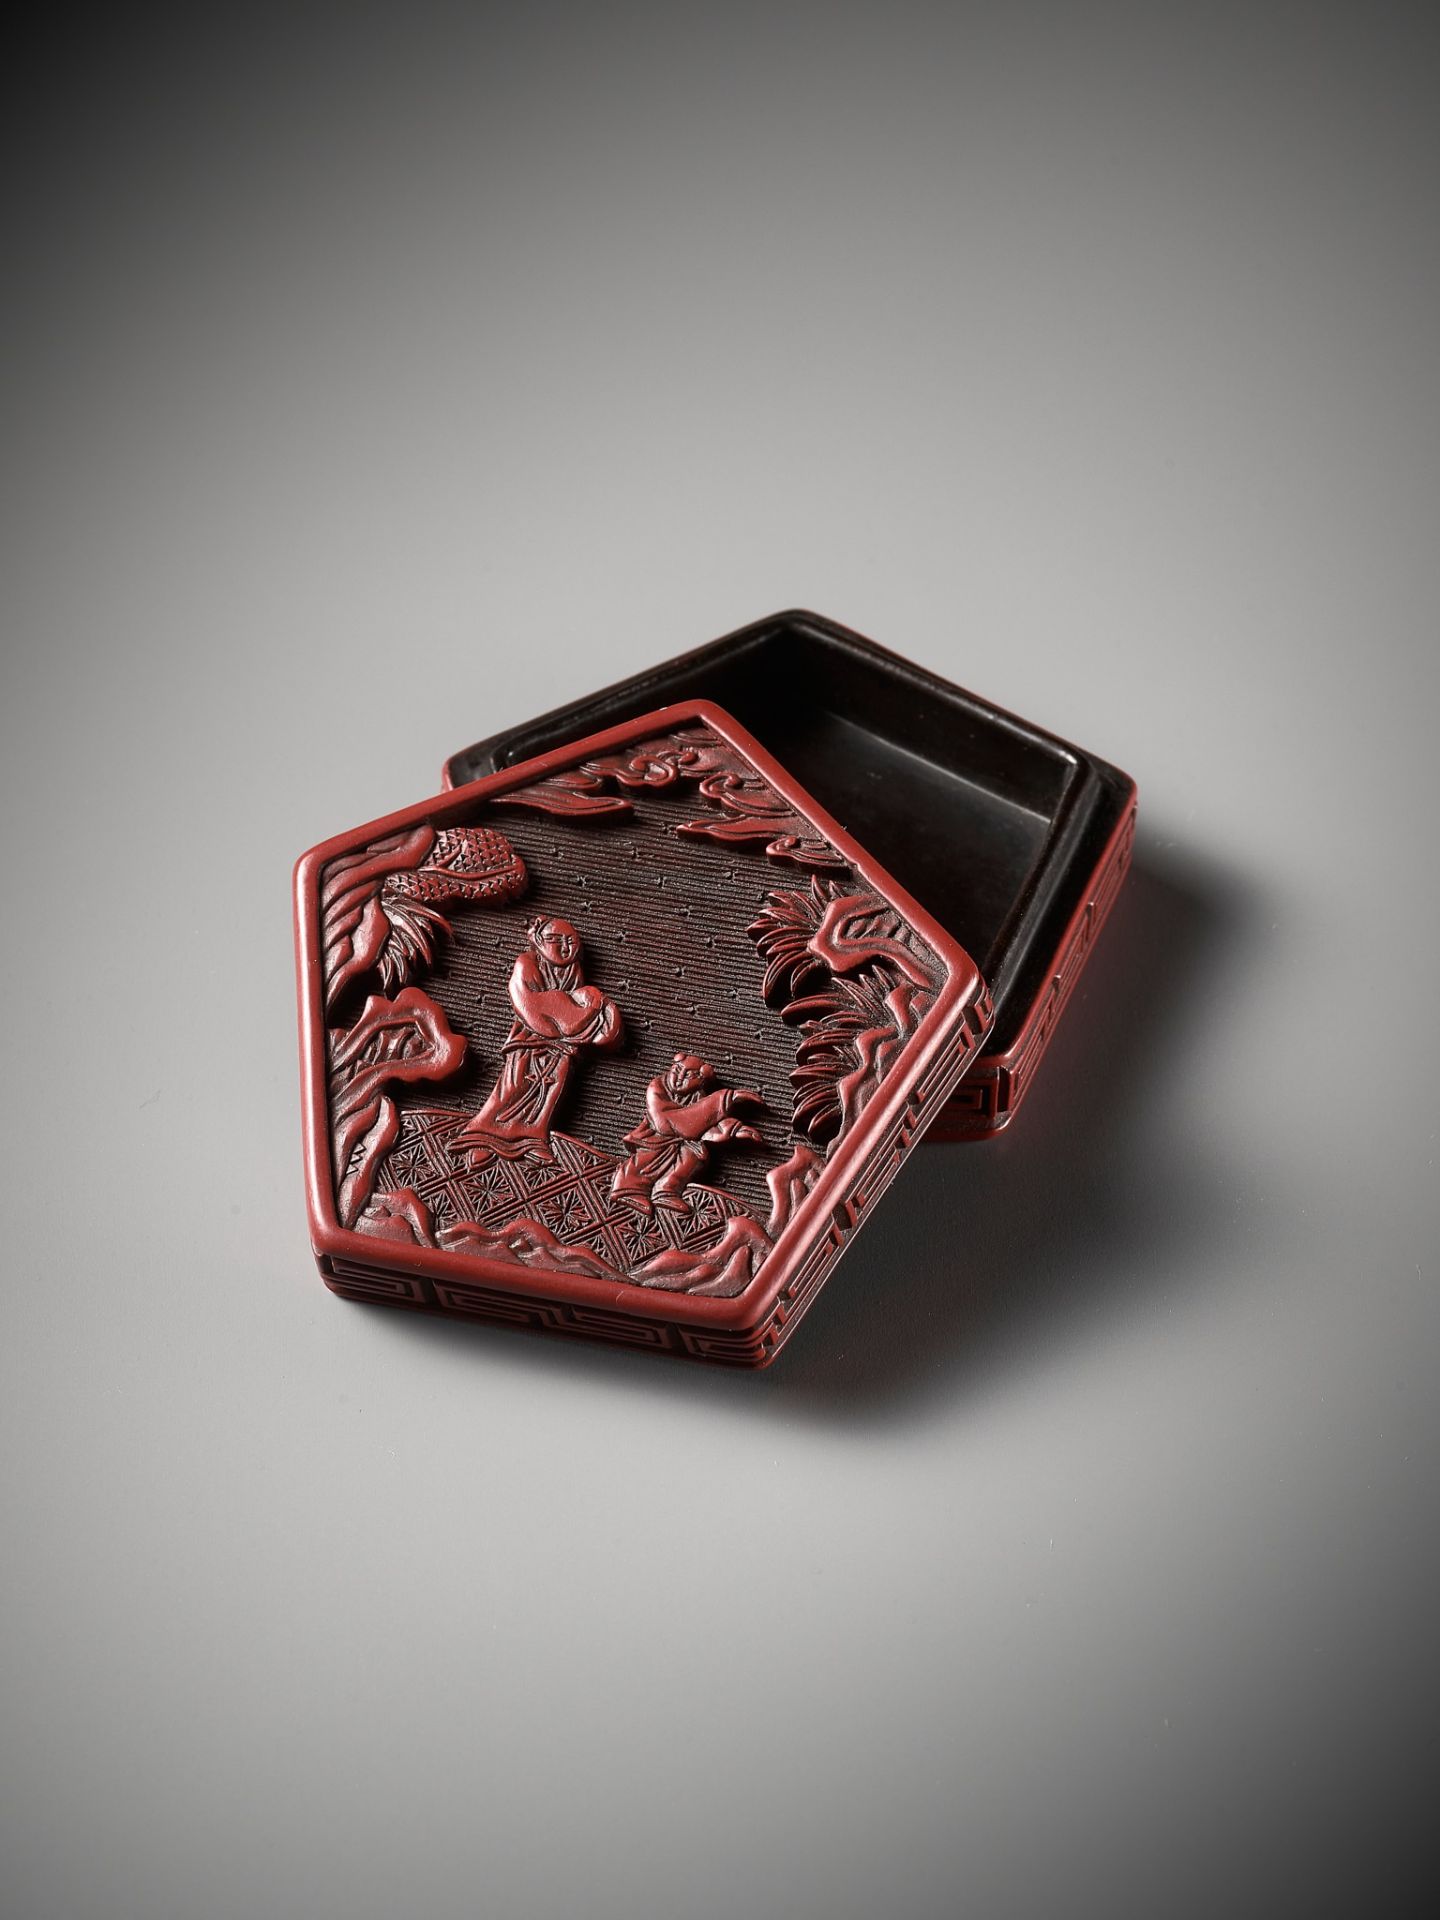 A SMALL CINNABAR LACQUER BOX AND COVER, YUAN TO MID-MING DYNASTY - Image 8 of 12